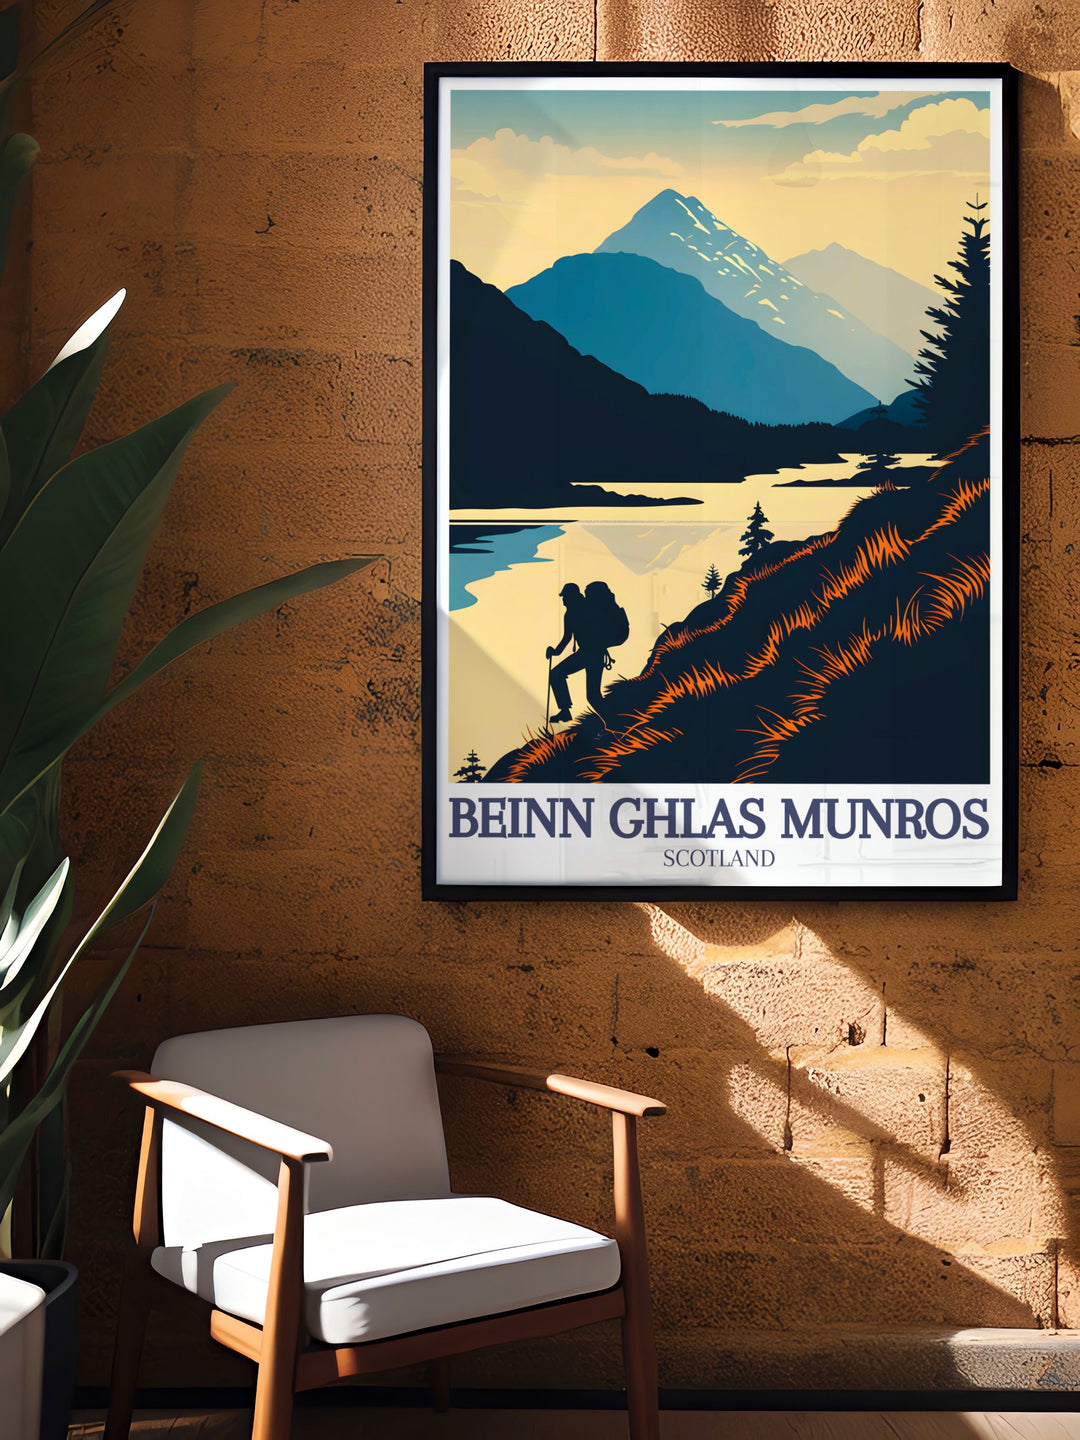 Ben Lawers and Loch Tay vintage print showcasing the tranquil beauty of the Scottish Highlands with Beinn Ghlas Munro. A perfect piece for any nature lovers home decor.